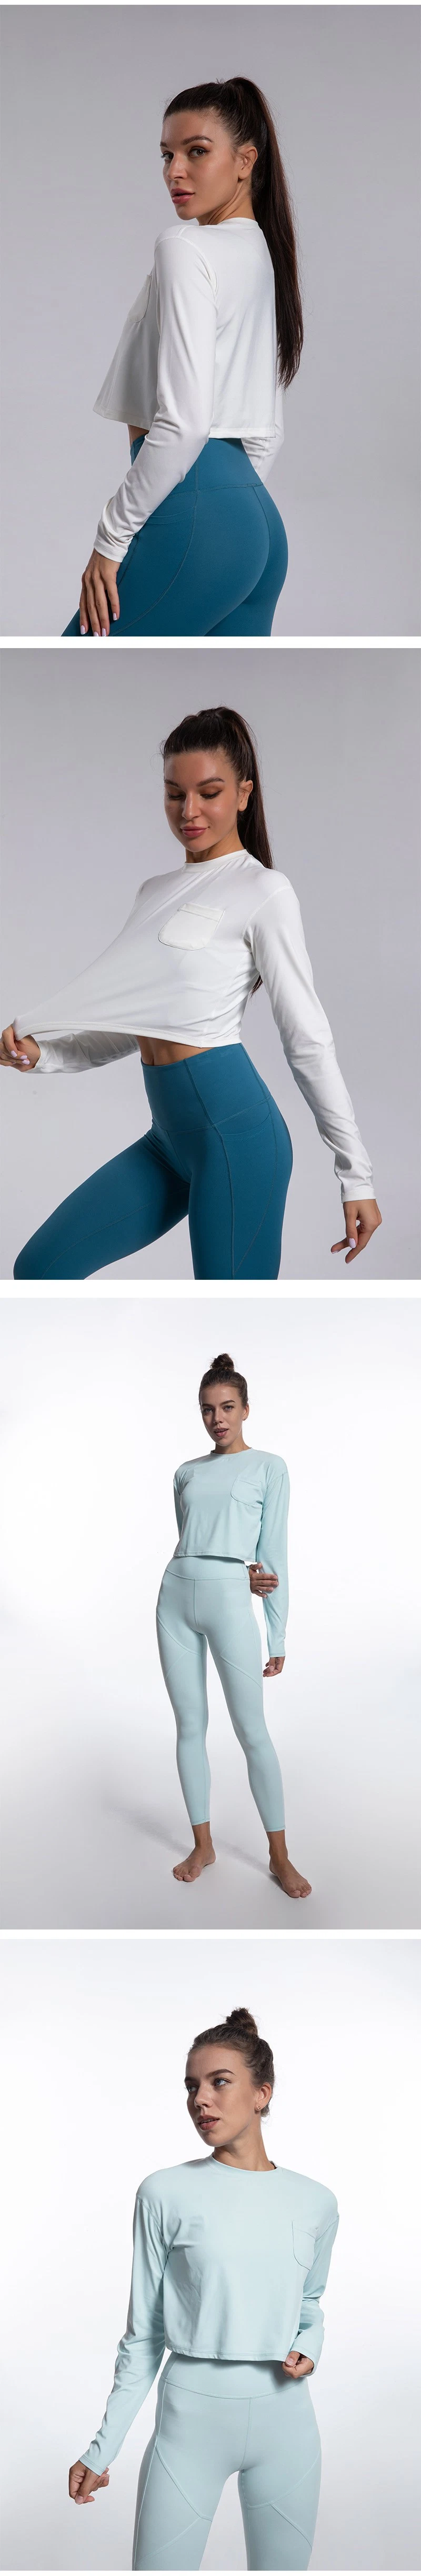 New Fashion Design Nude White Long-Sleeved T-Shirt Yoga Fitness Top Women&prime;s Navel High Elastic Sports Simple and Versatile One-Piece Yoga Top